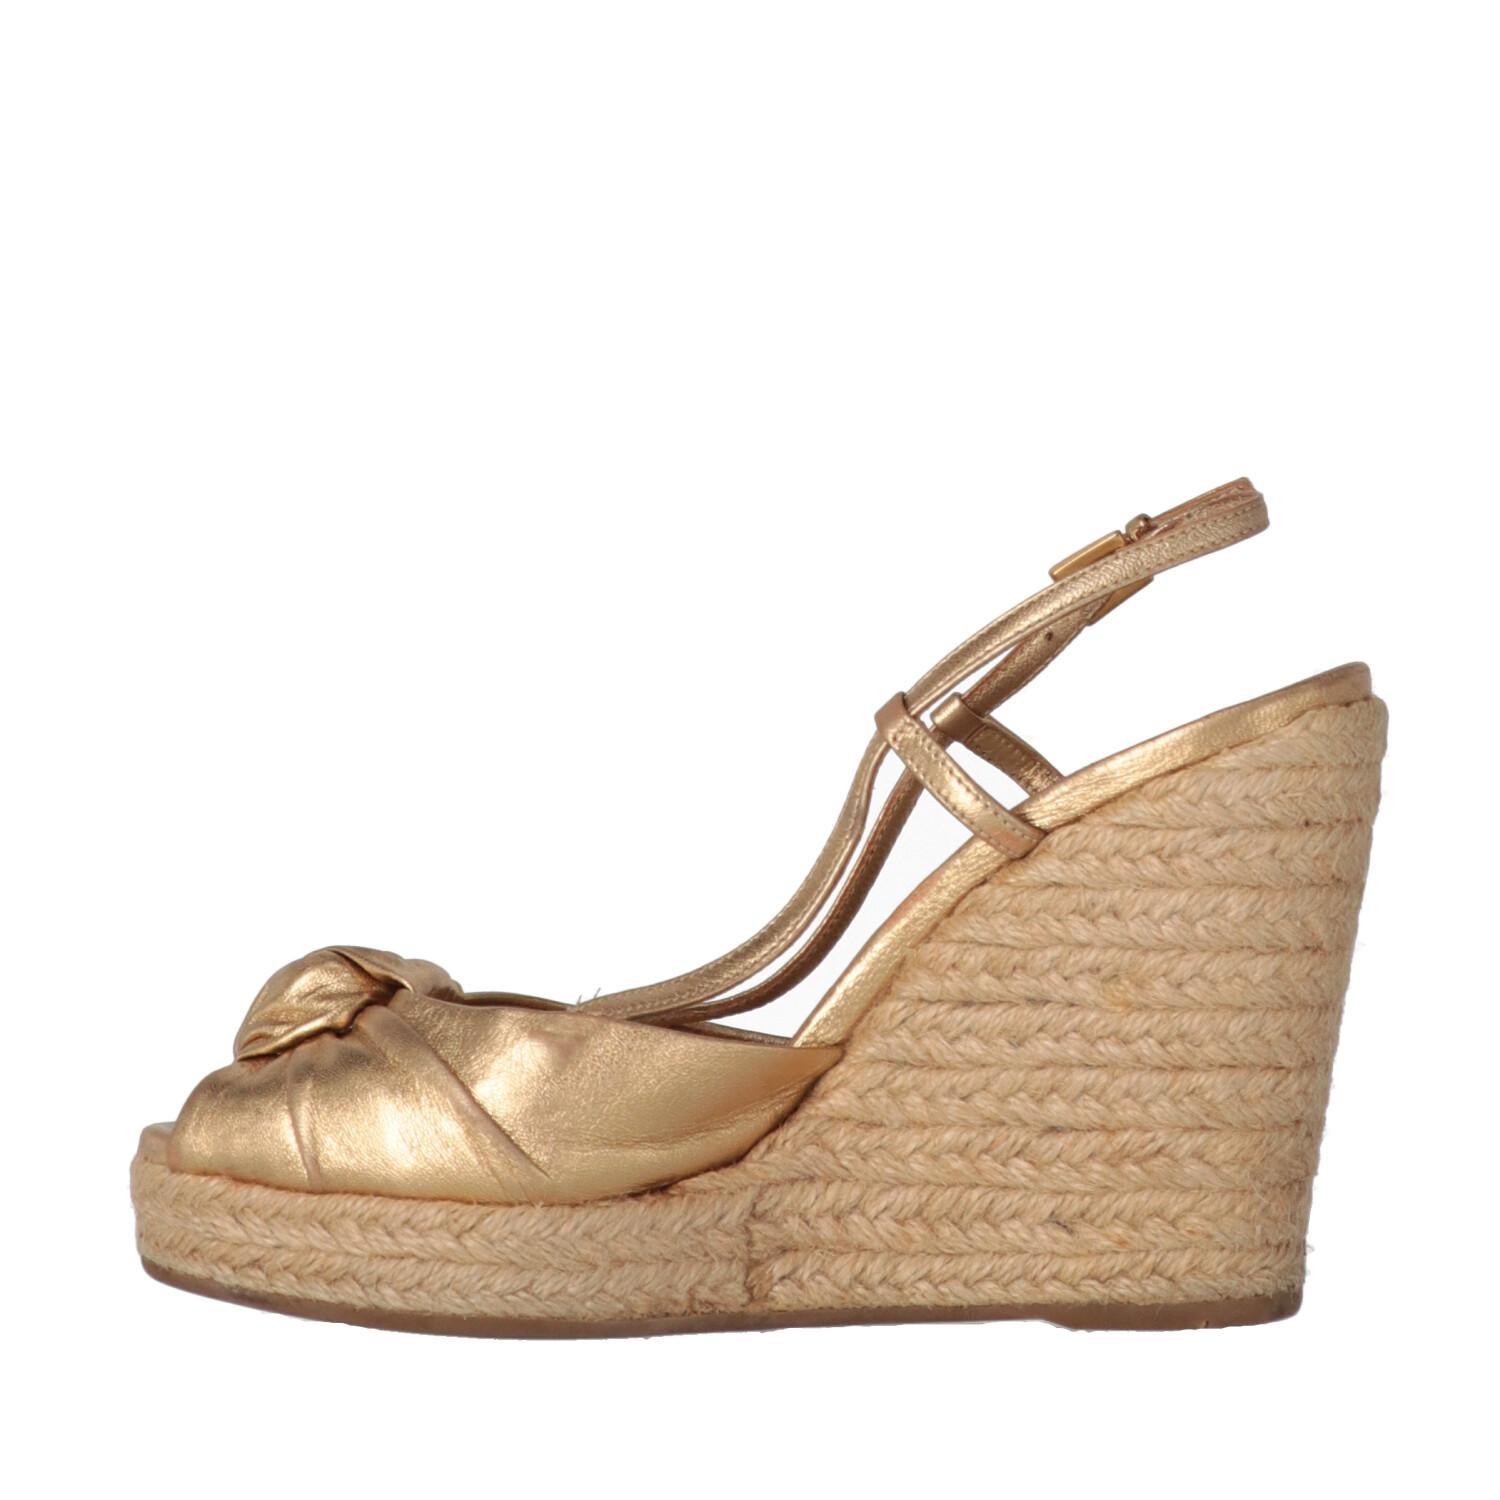 A.N.G.E.L.O. Vintage - ITALY
Prada golden leather high sandals with decorative front knot, ankle strap and rope wedge.
Years: 90s

Made in Italy

Size: 36,5 EU

Heel height: 10 cm
Insole: 23 cm